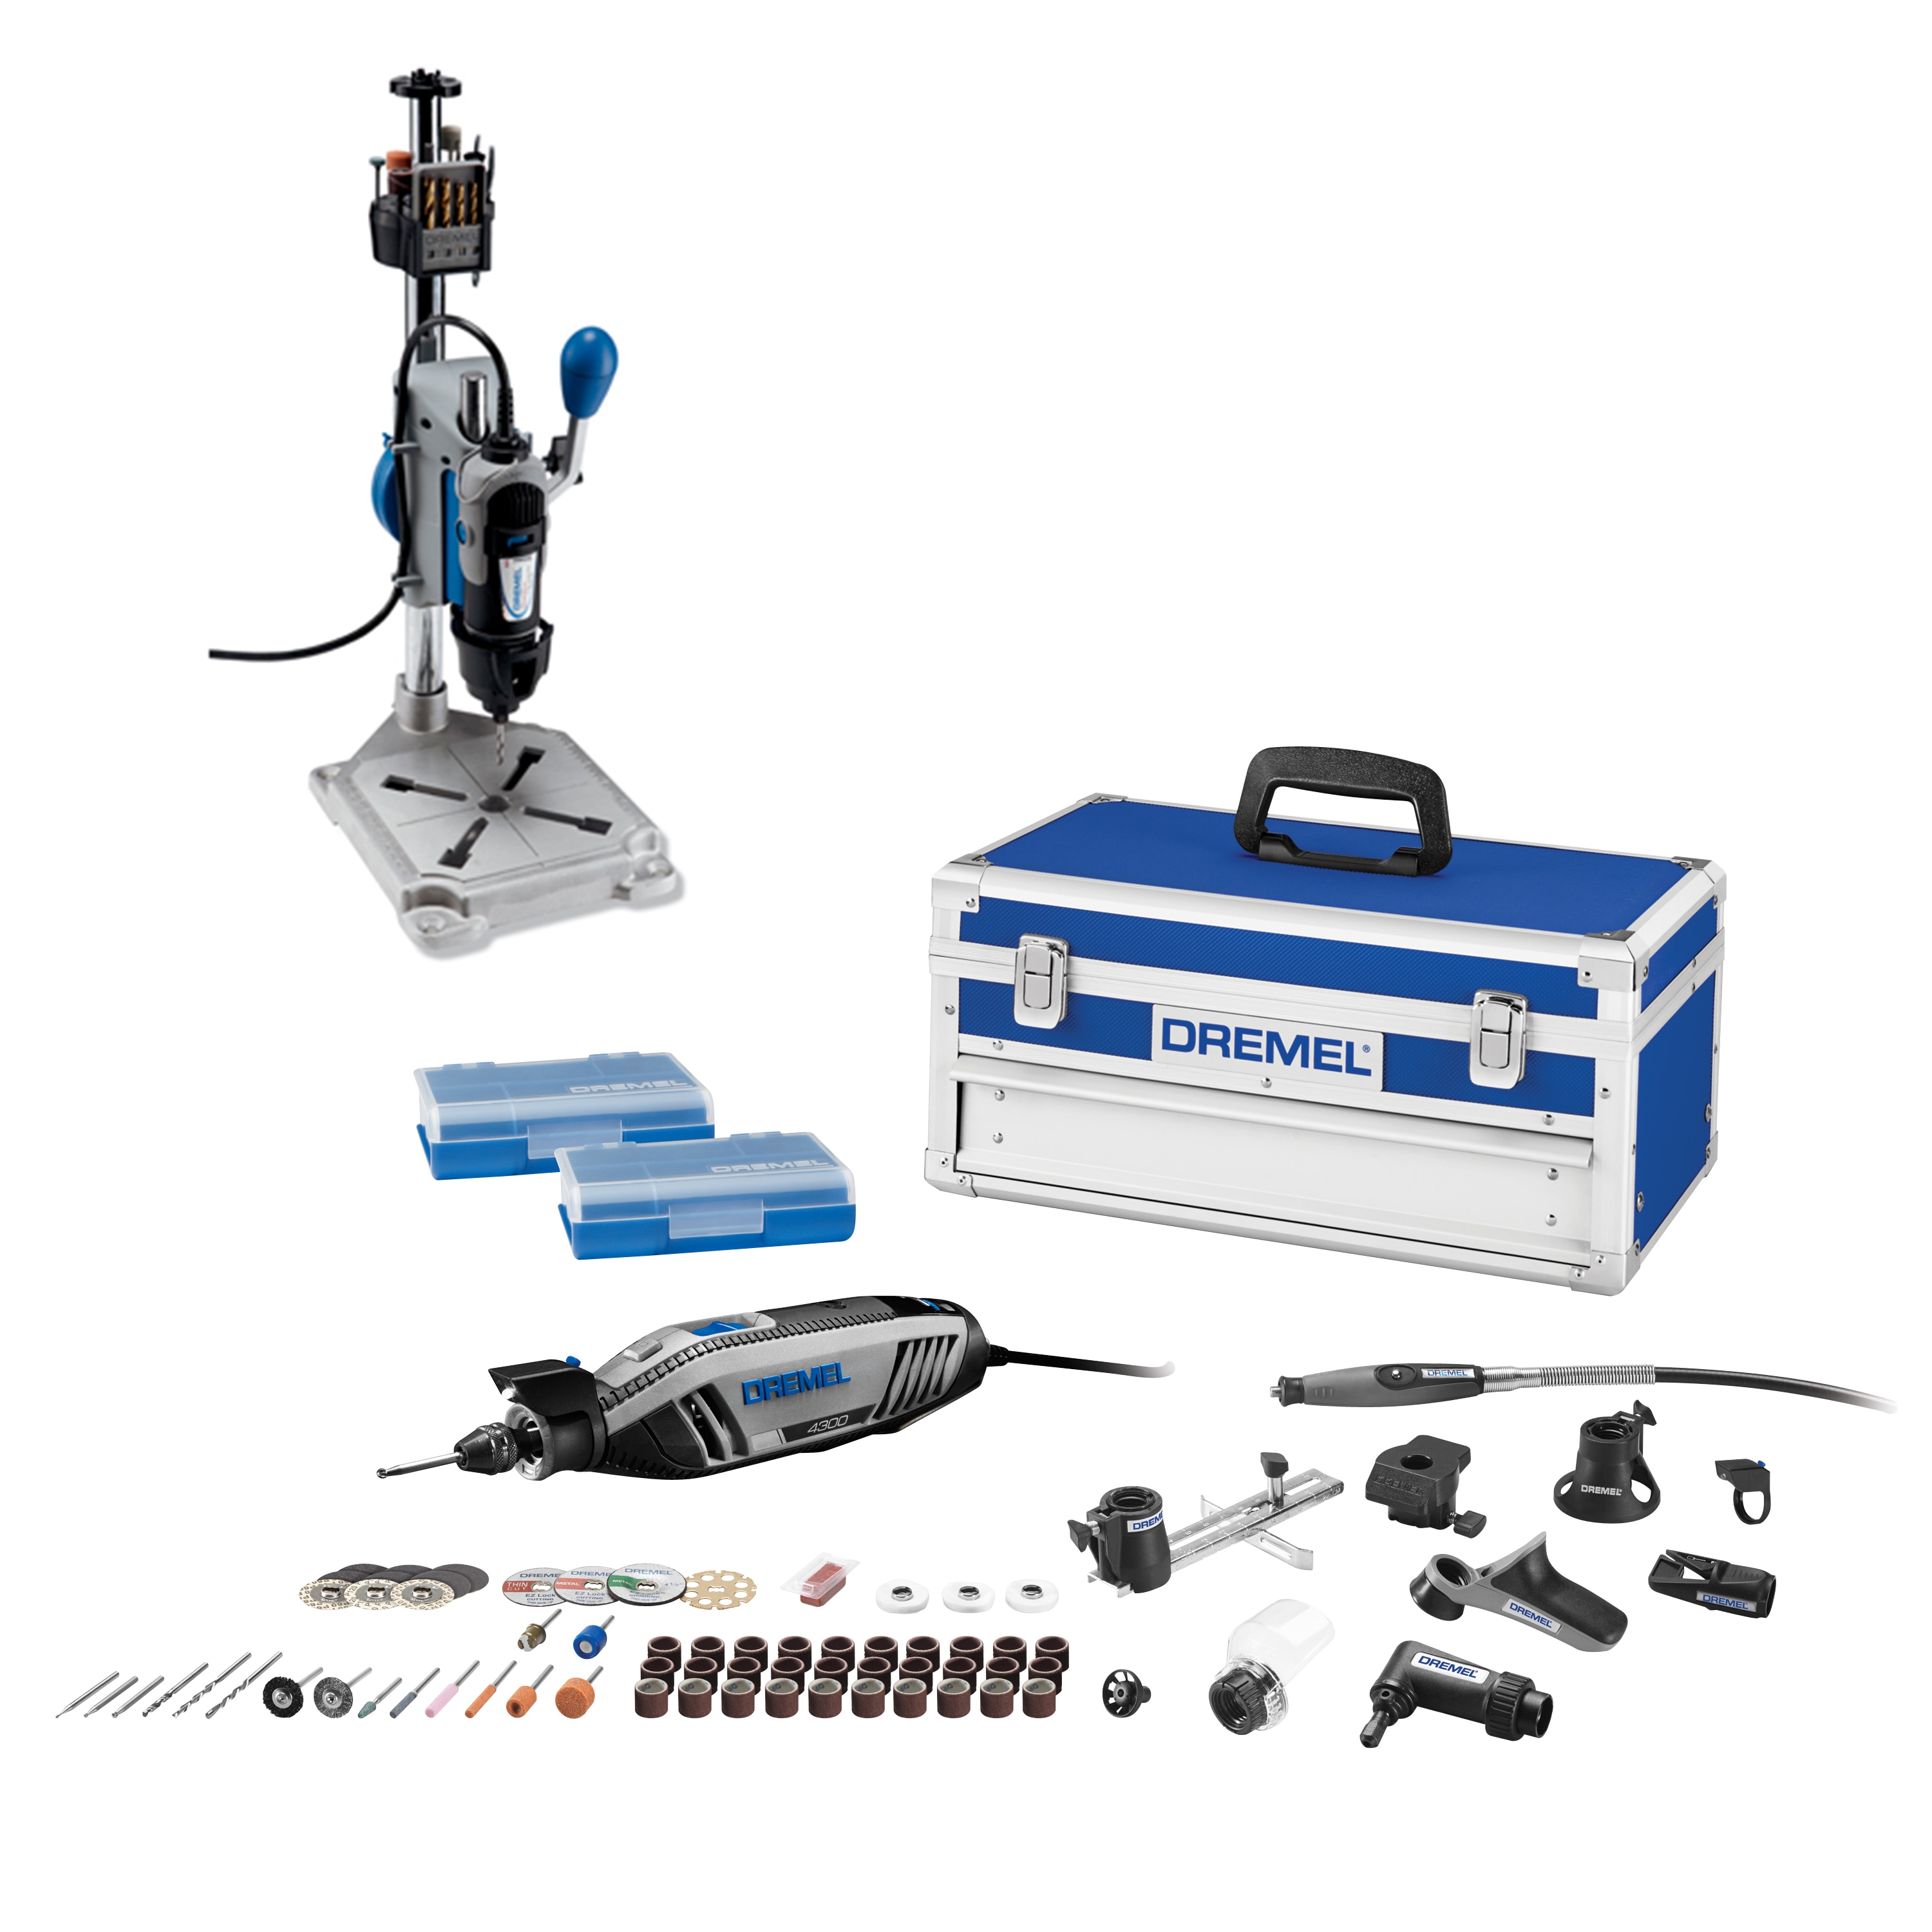 Dremel 4300 Corded Variable Speed Rotary Tool with 9 Attachments and 63  Accessories + Drill Press Workstation